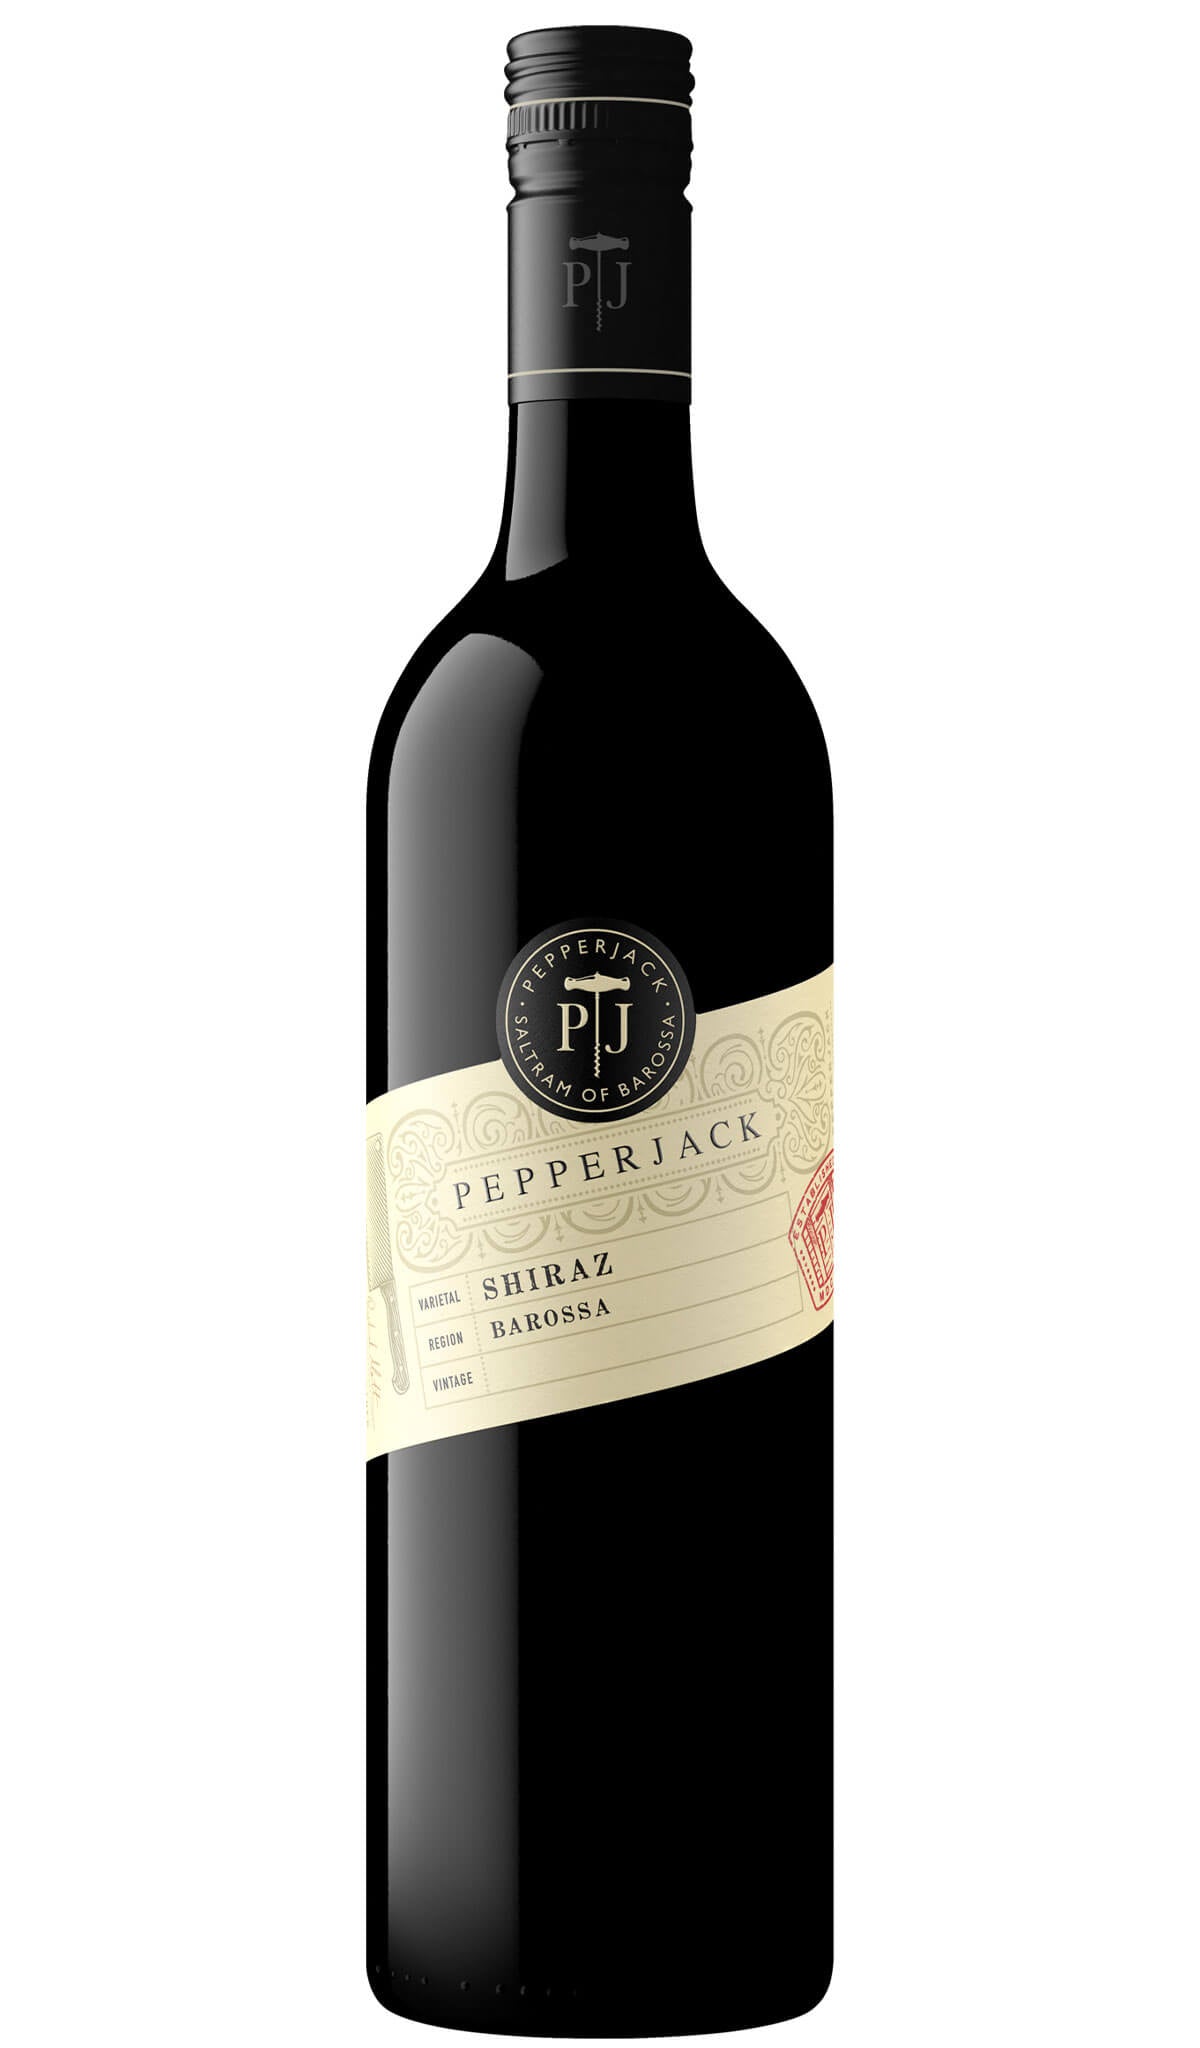 Find out more or buy Pepperjack Shiraz 2020 (Barossa Valley) online at Wine Sellers Direct - Australia’s independent liquor specialists.